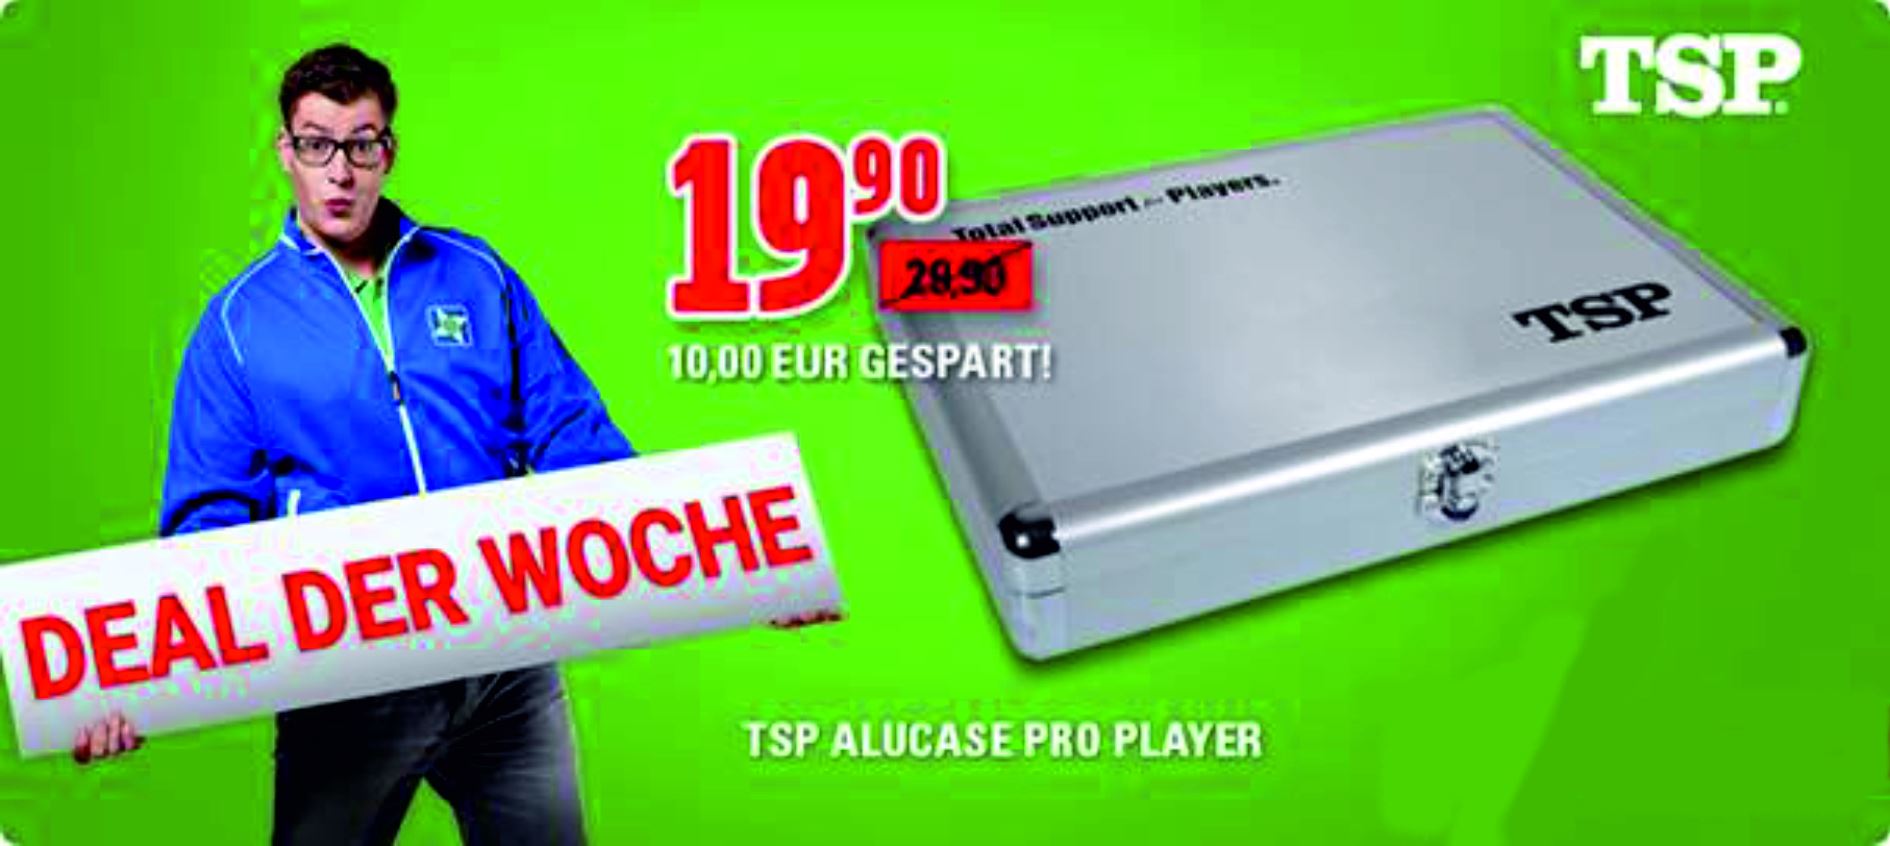 You are currently viewing DEAL DER WOCHE: TSP Alucase pro Player